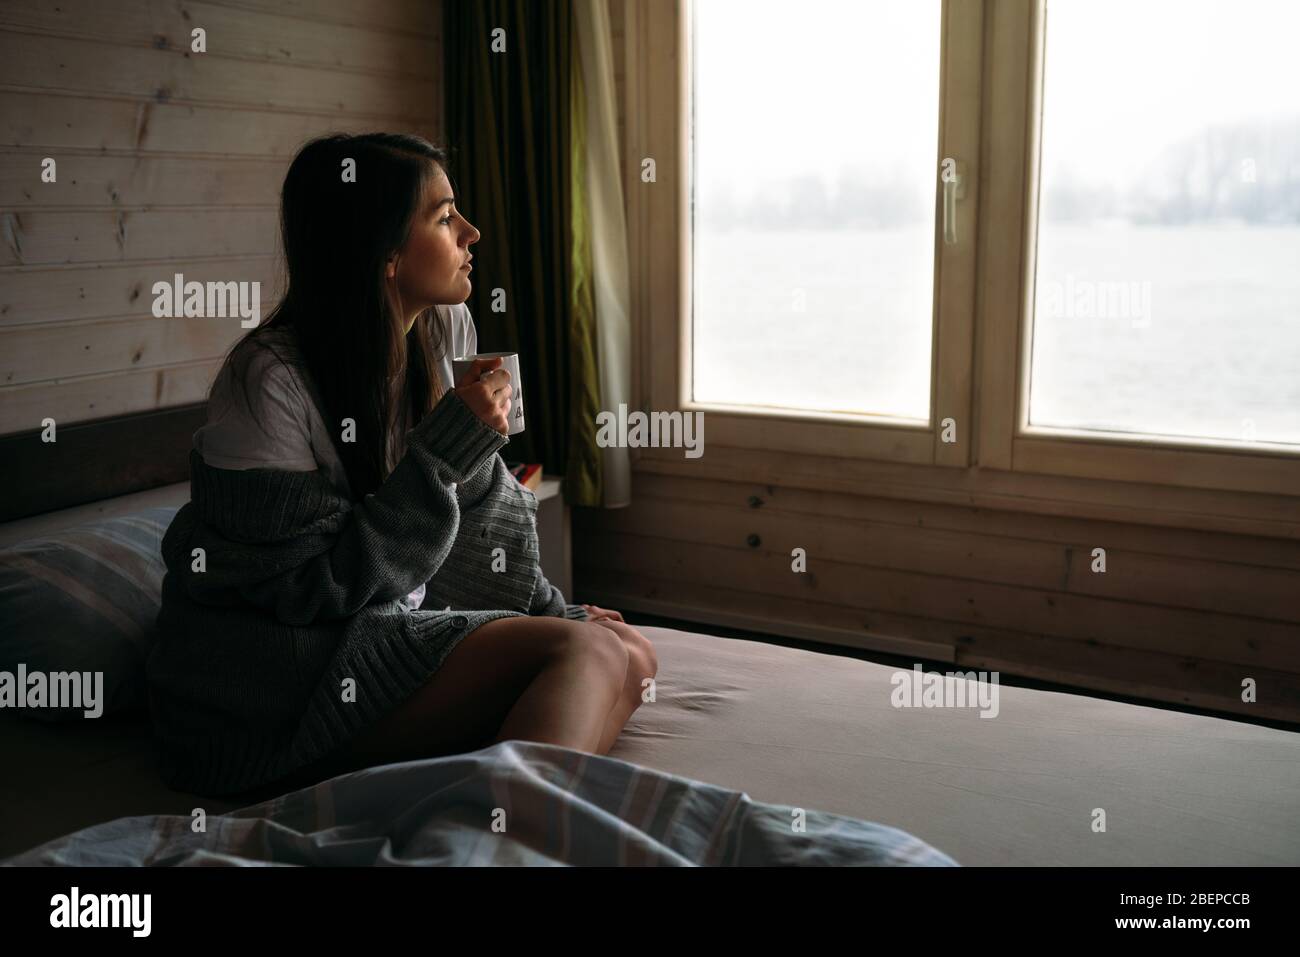 Young woman staying at home drinking coffee/tea,looking trough the window.Starting the day,morning ritual.Quaratine self isolation concept.Worried wom Stock Photo